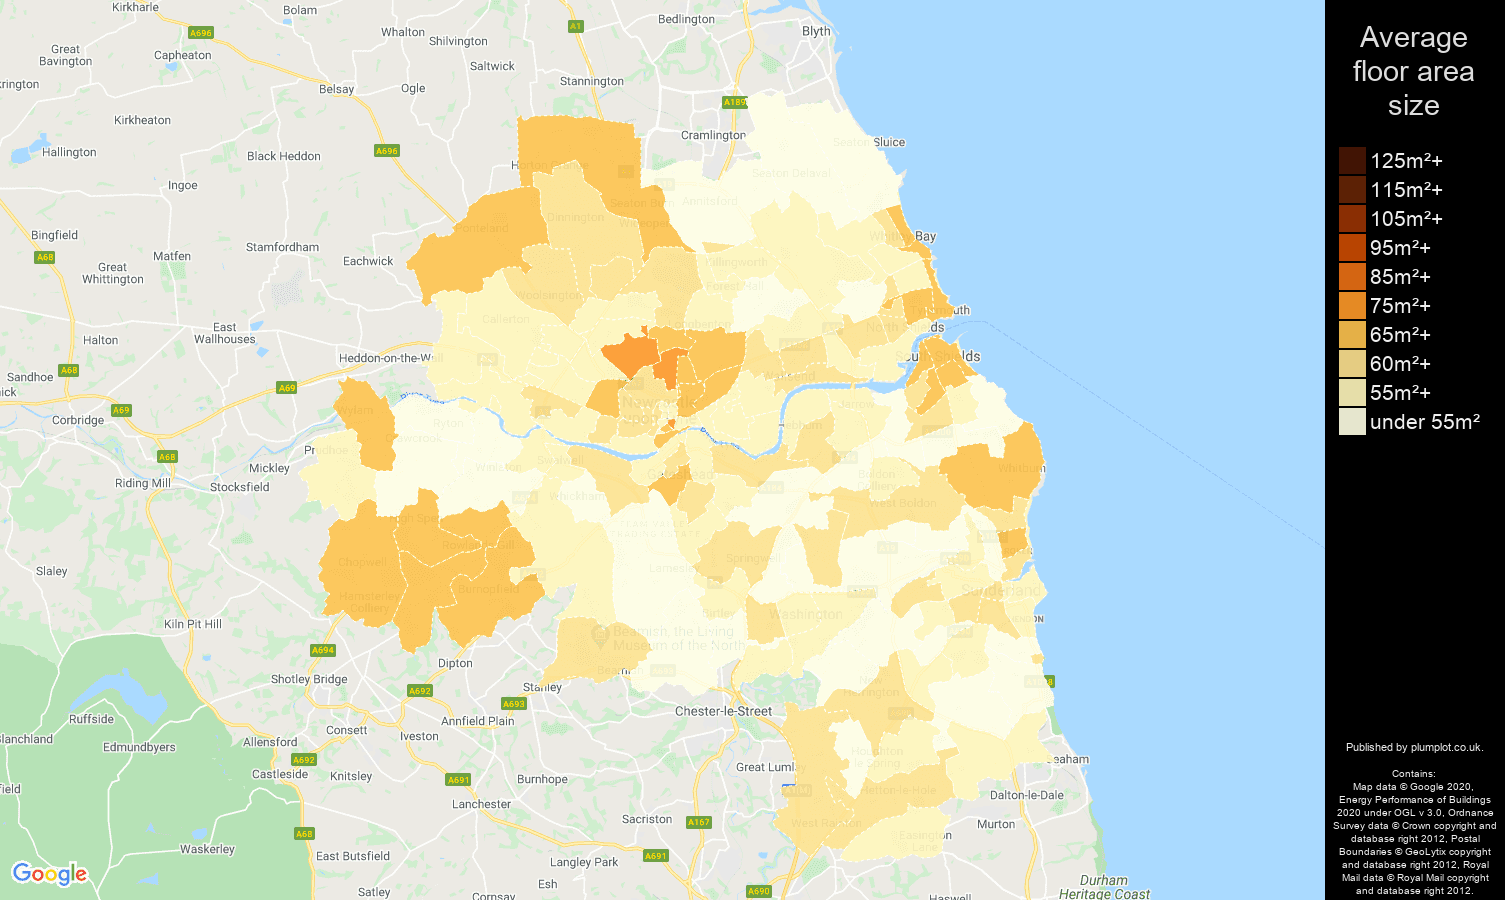 Tyne and Wear map of average floor area size of flats